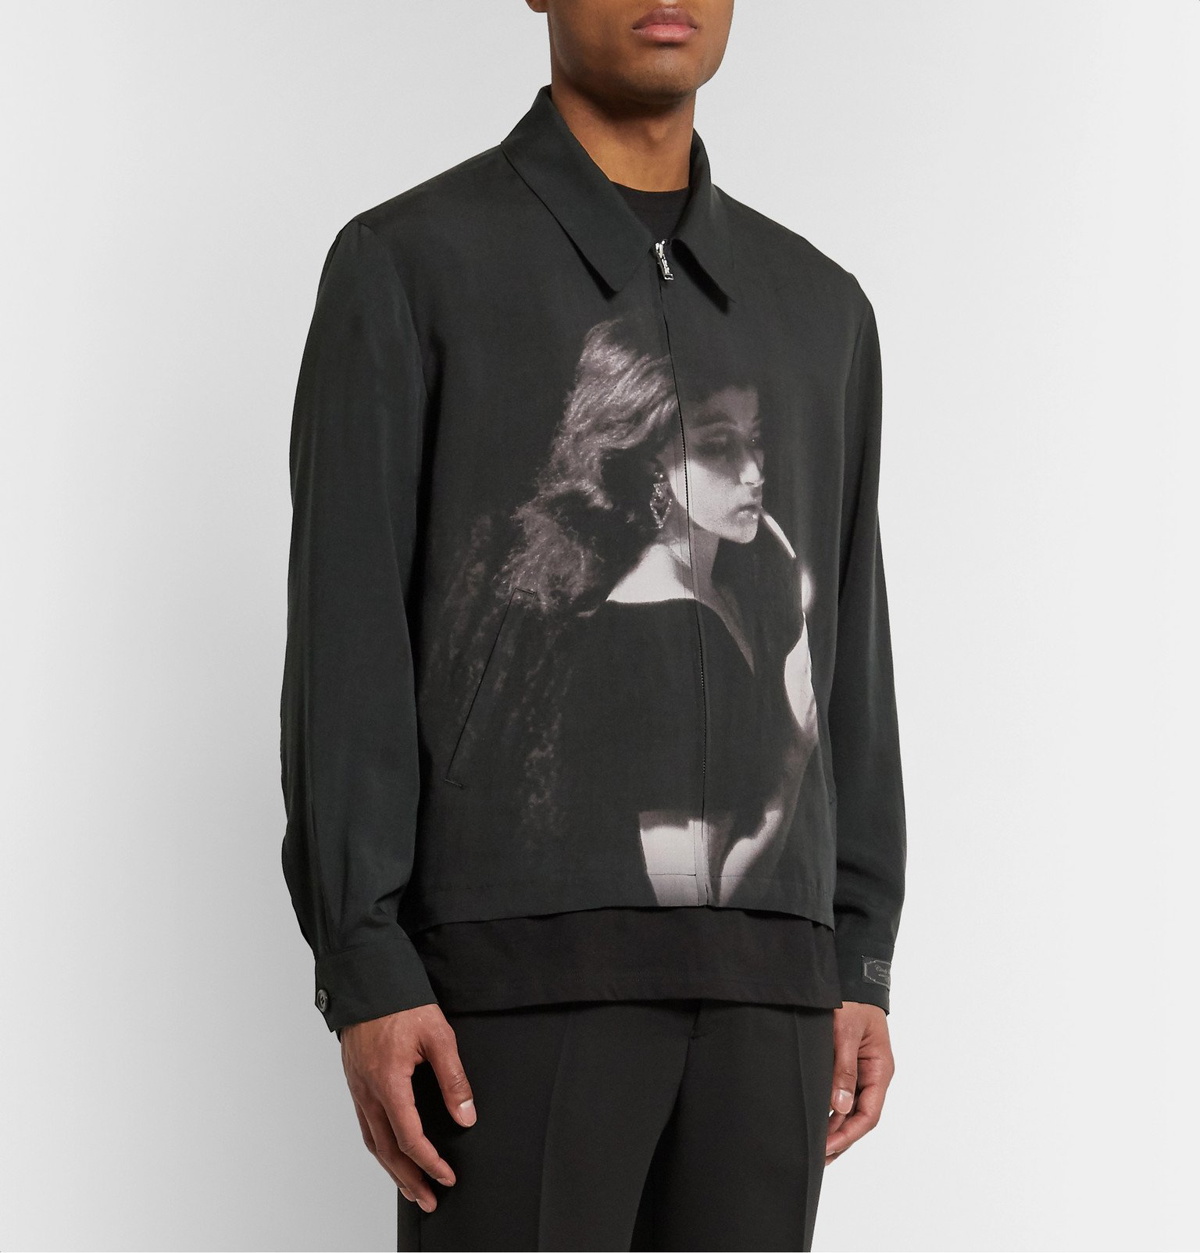 Undercover 20ss Cindy Sherman 2-